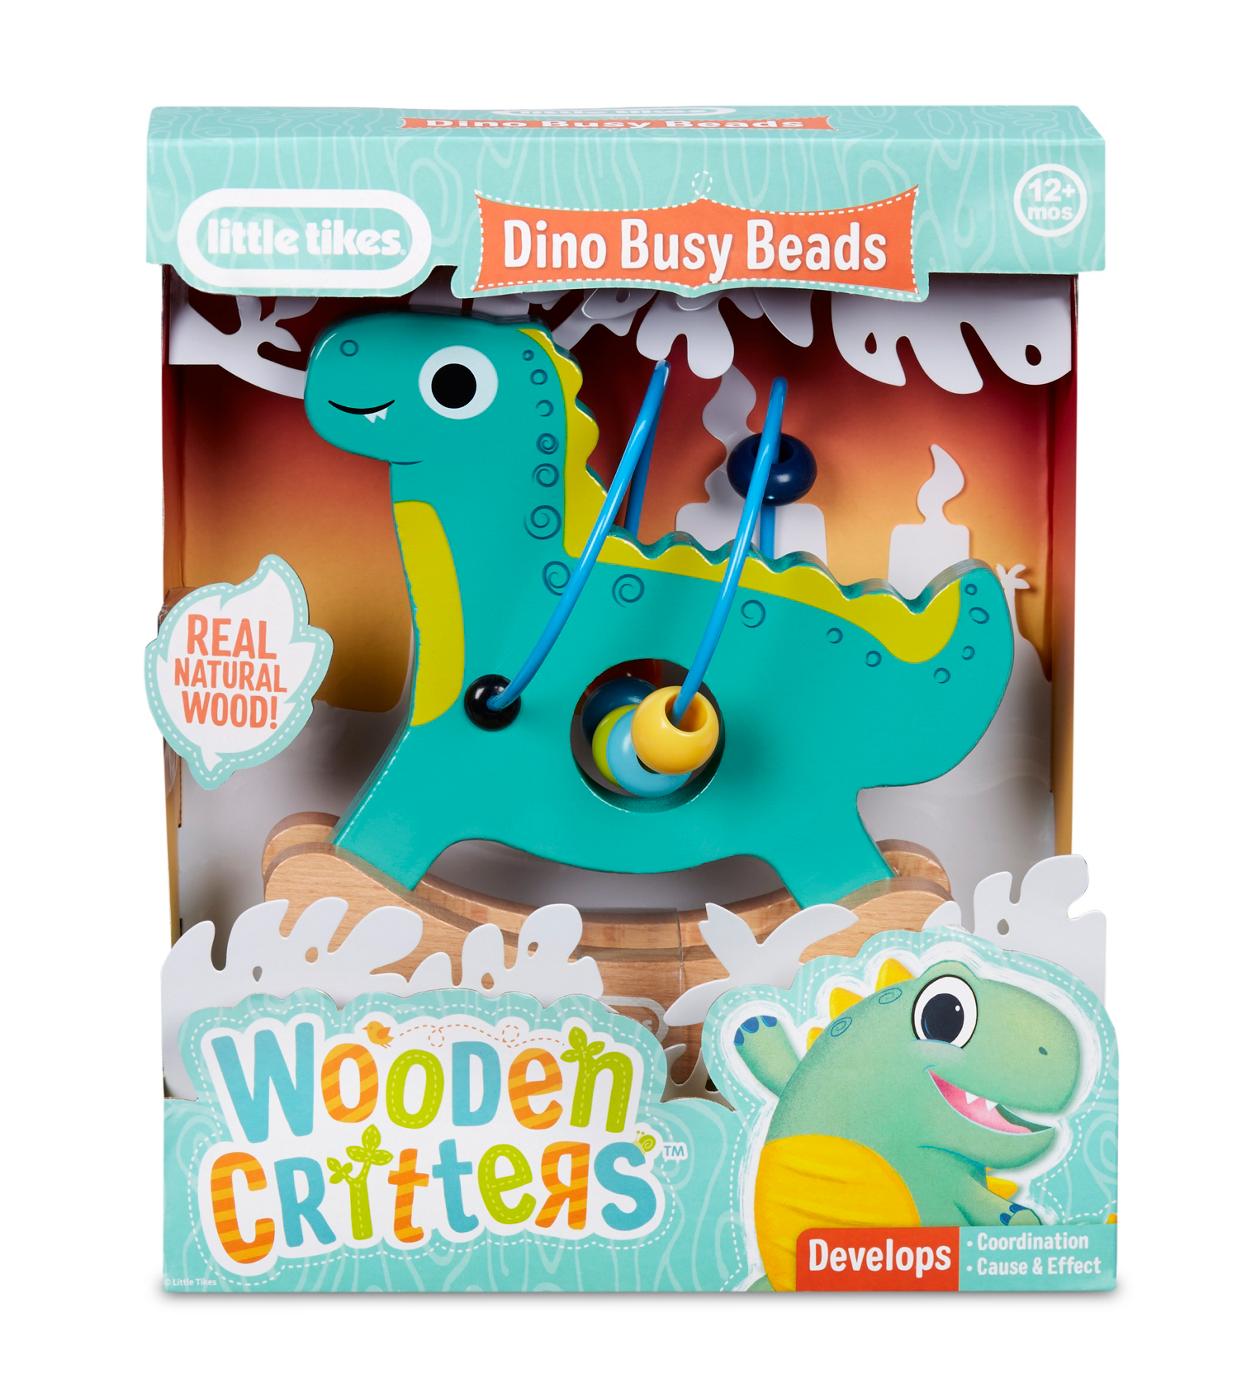 Little Tikes Wooden Critters Busy Beads, Assorted; image 2 of 3